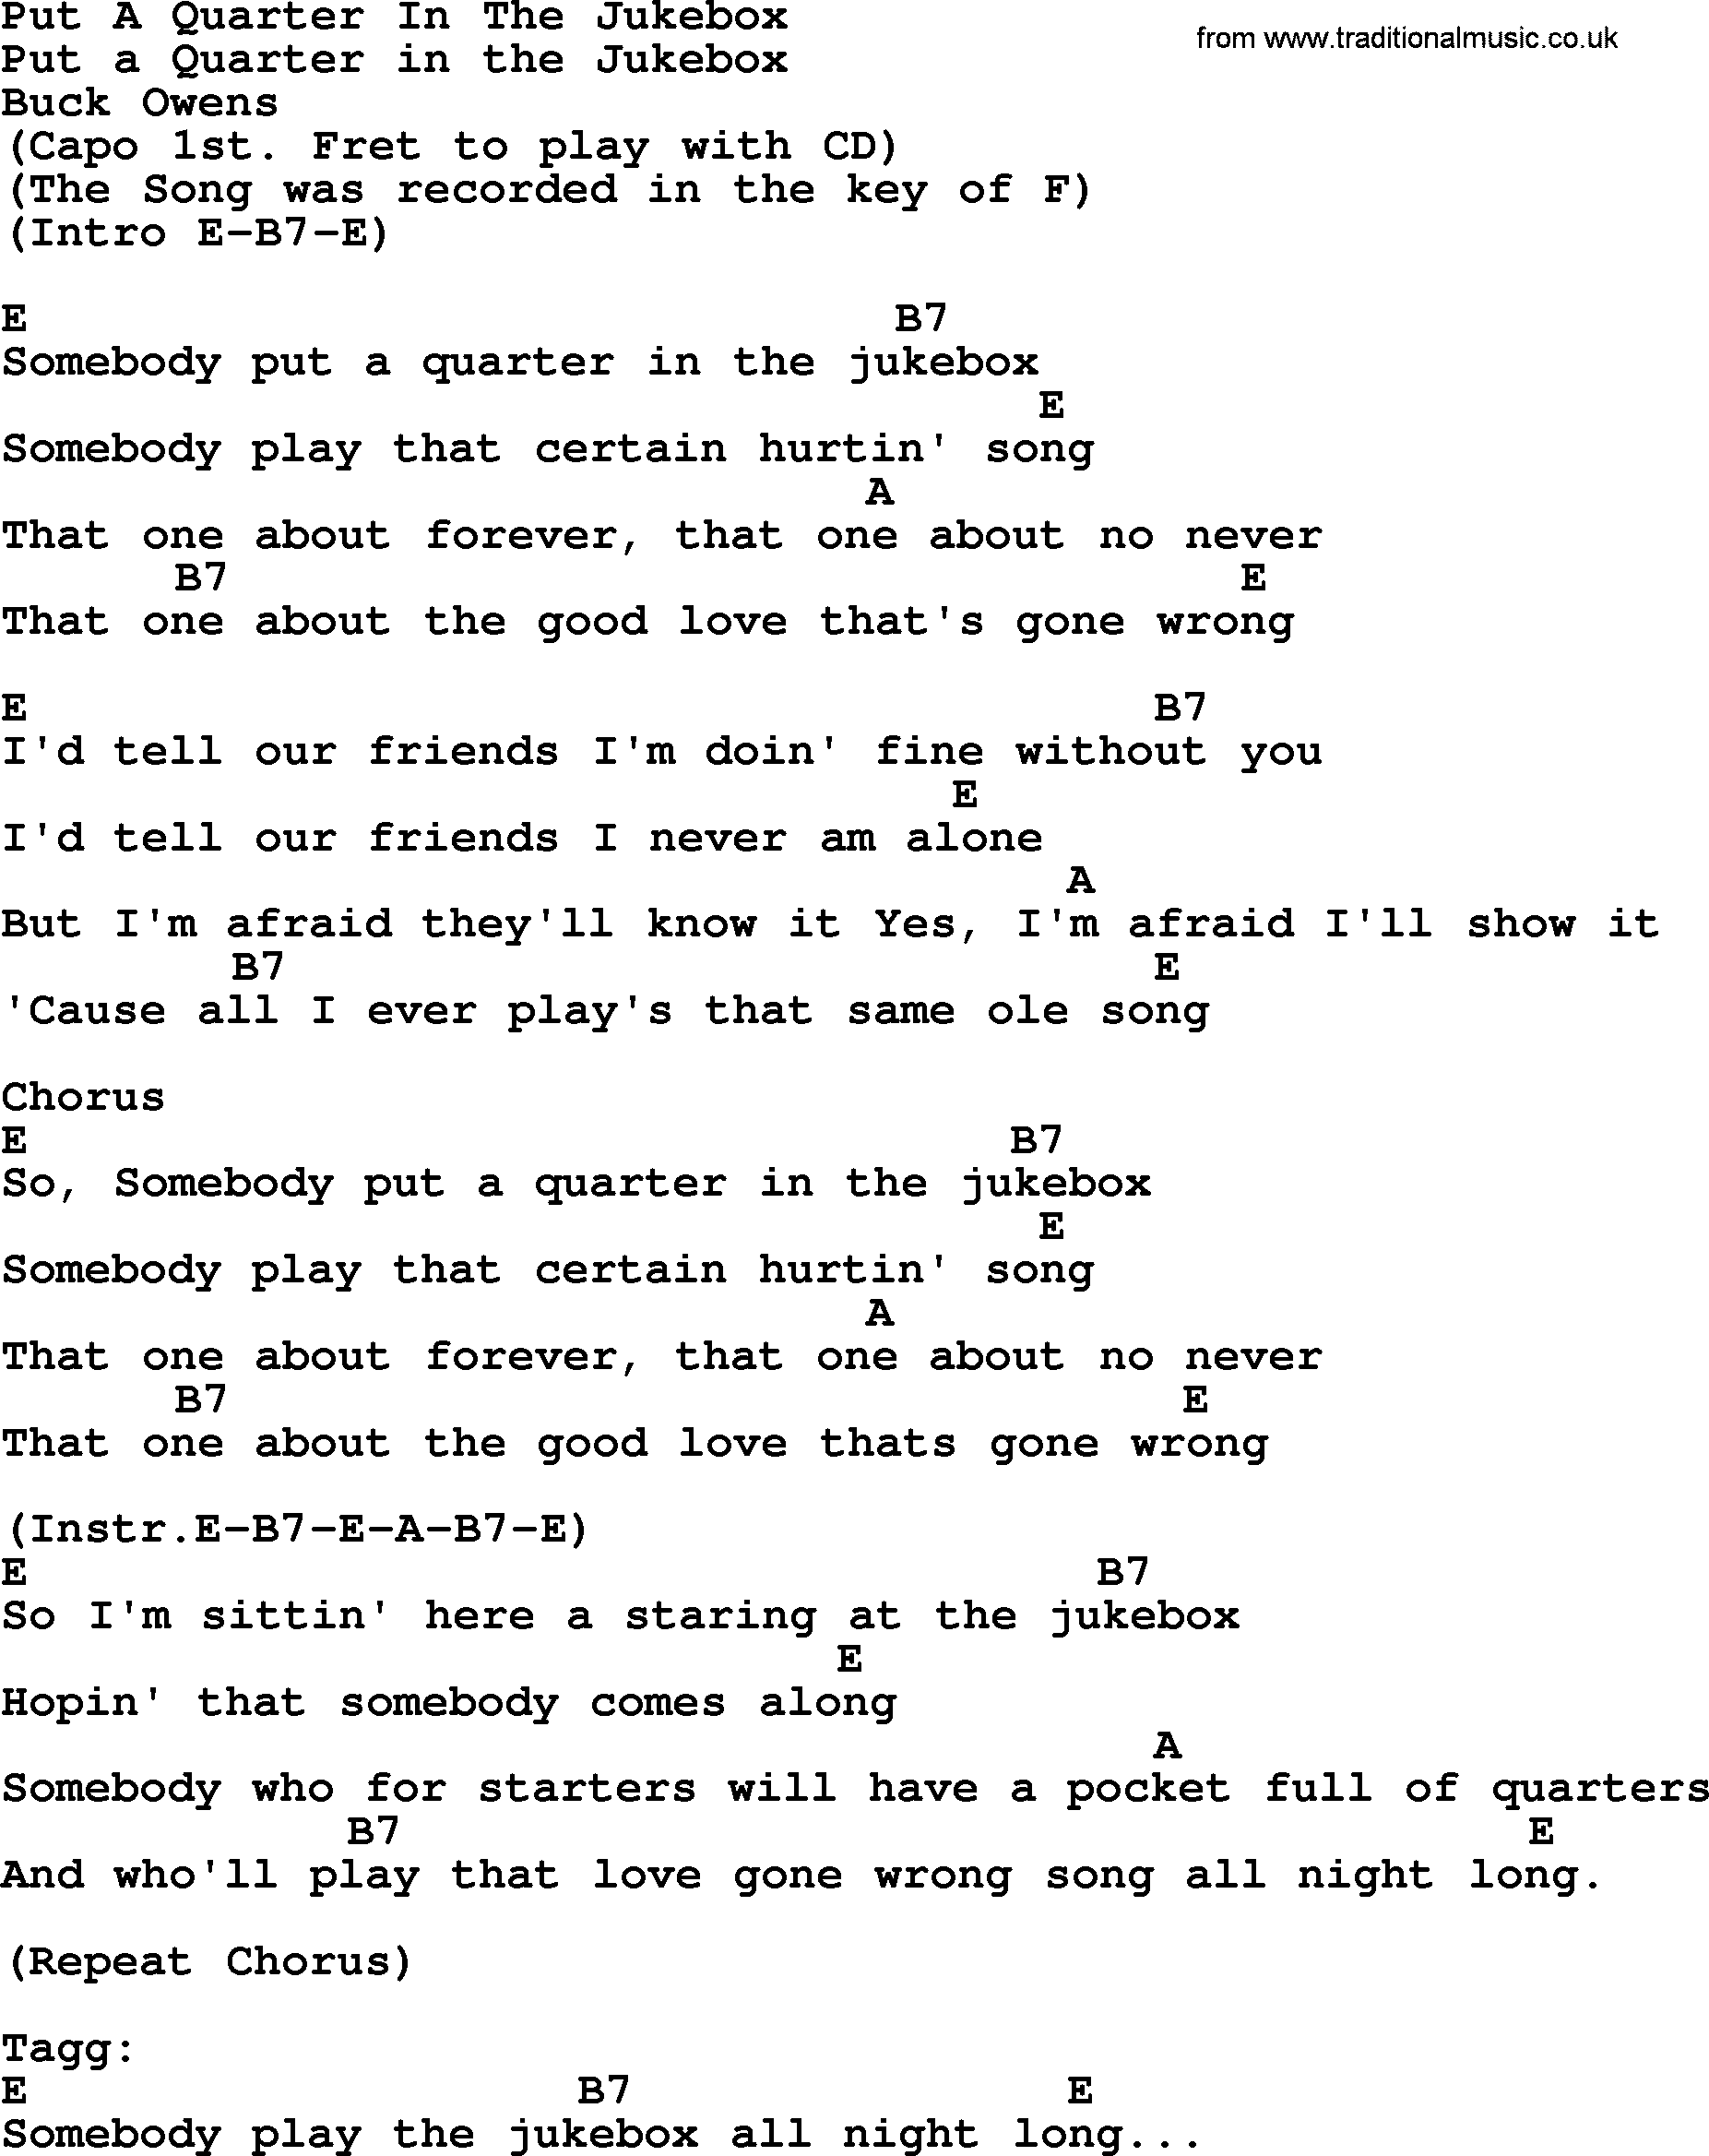 Bluegrass song: Put A Quarter In The Jukebox, lyrics and chords